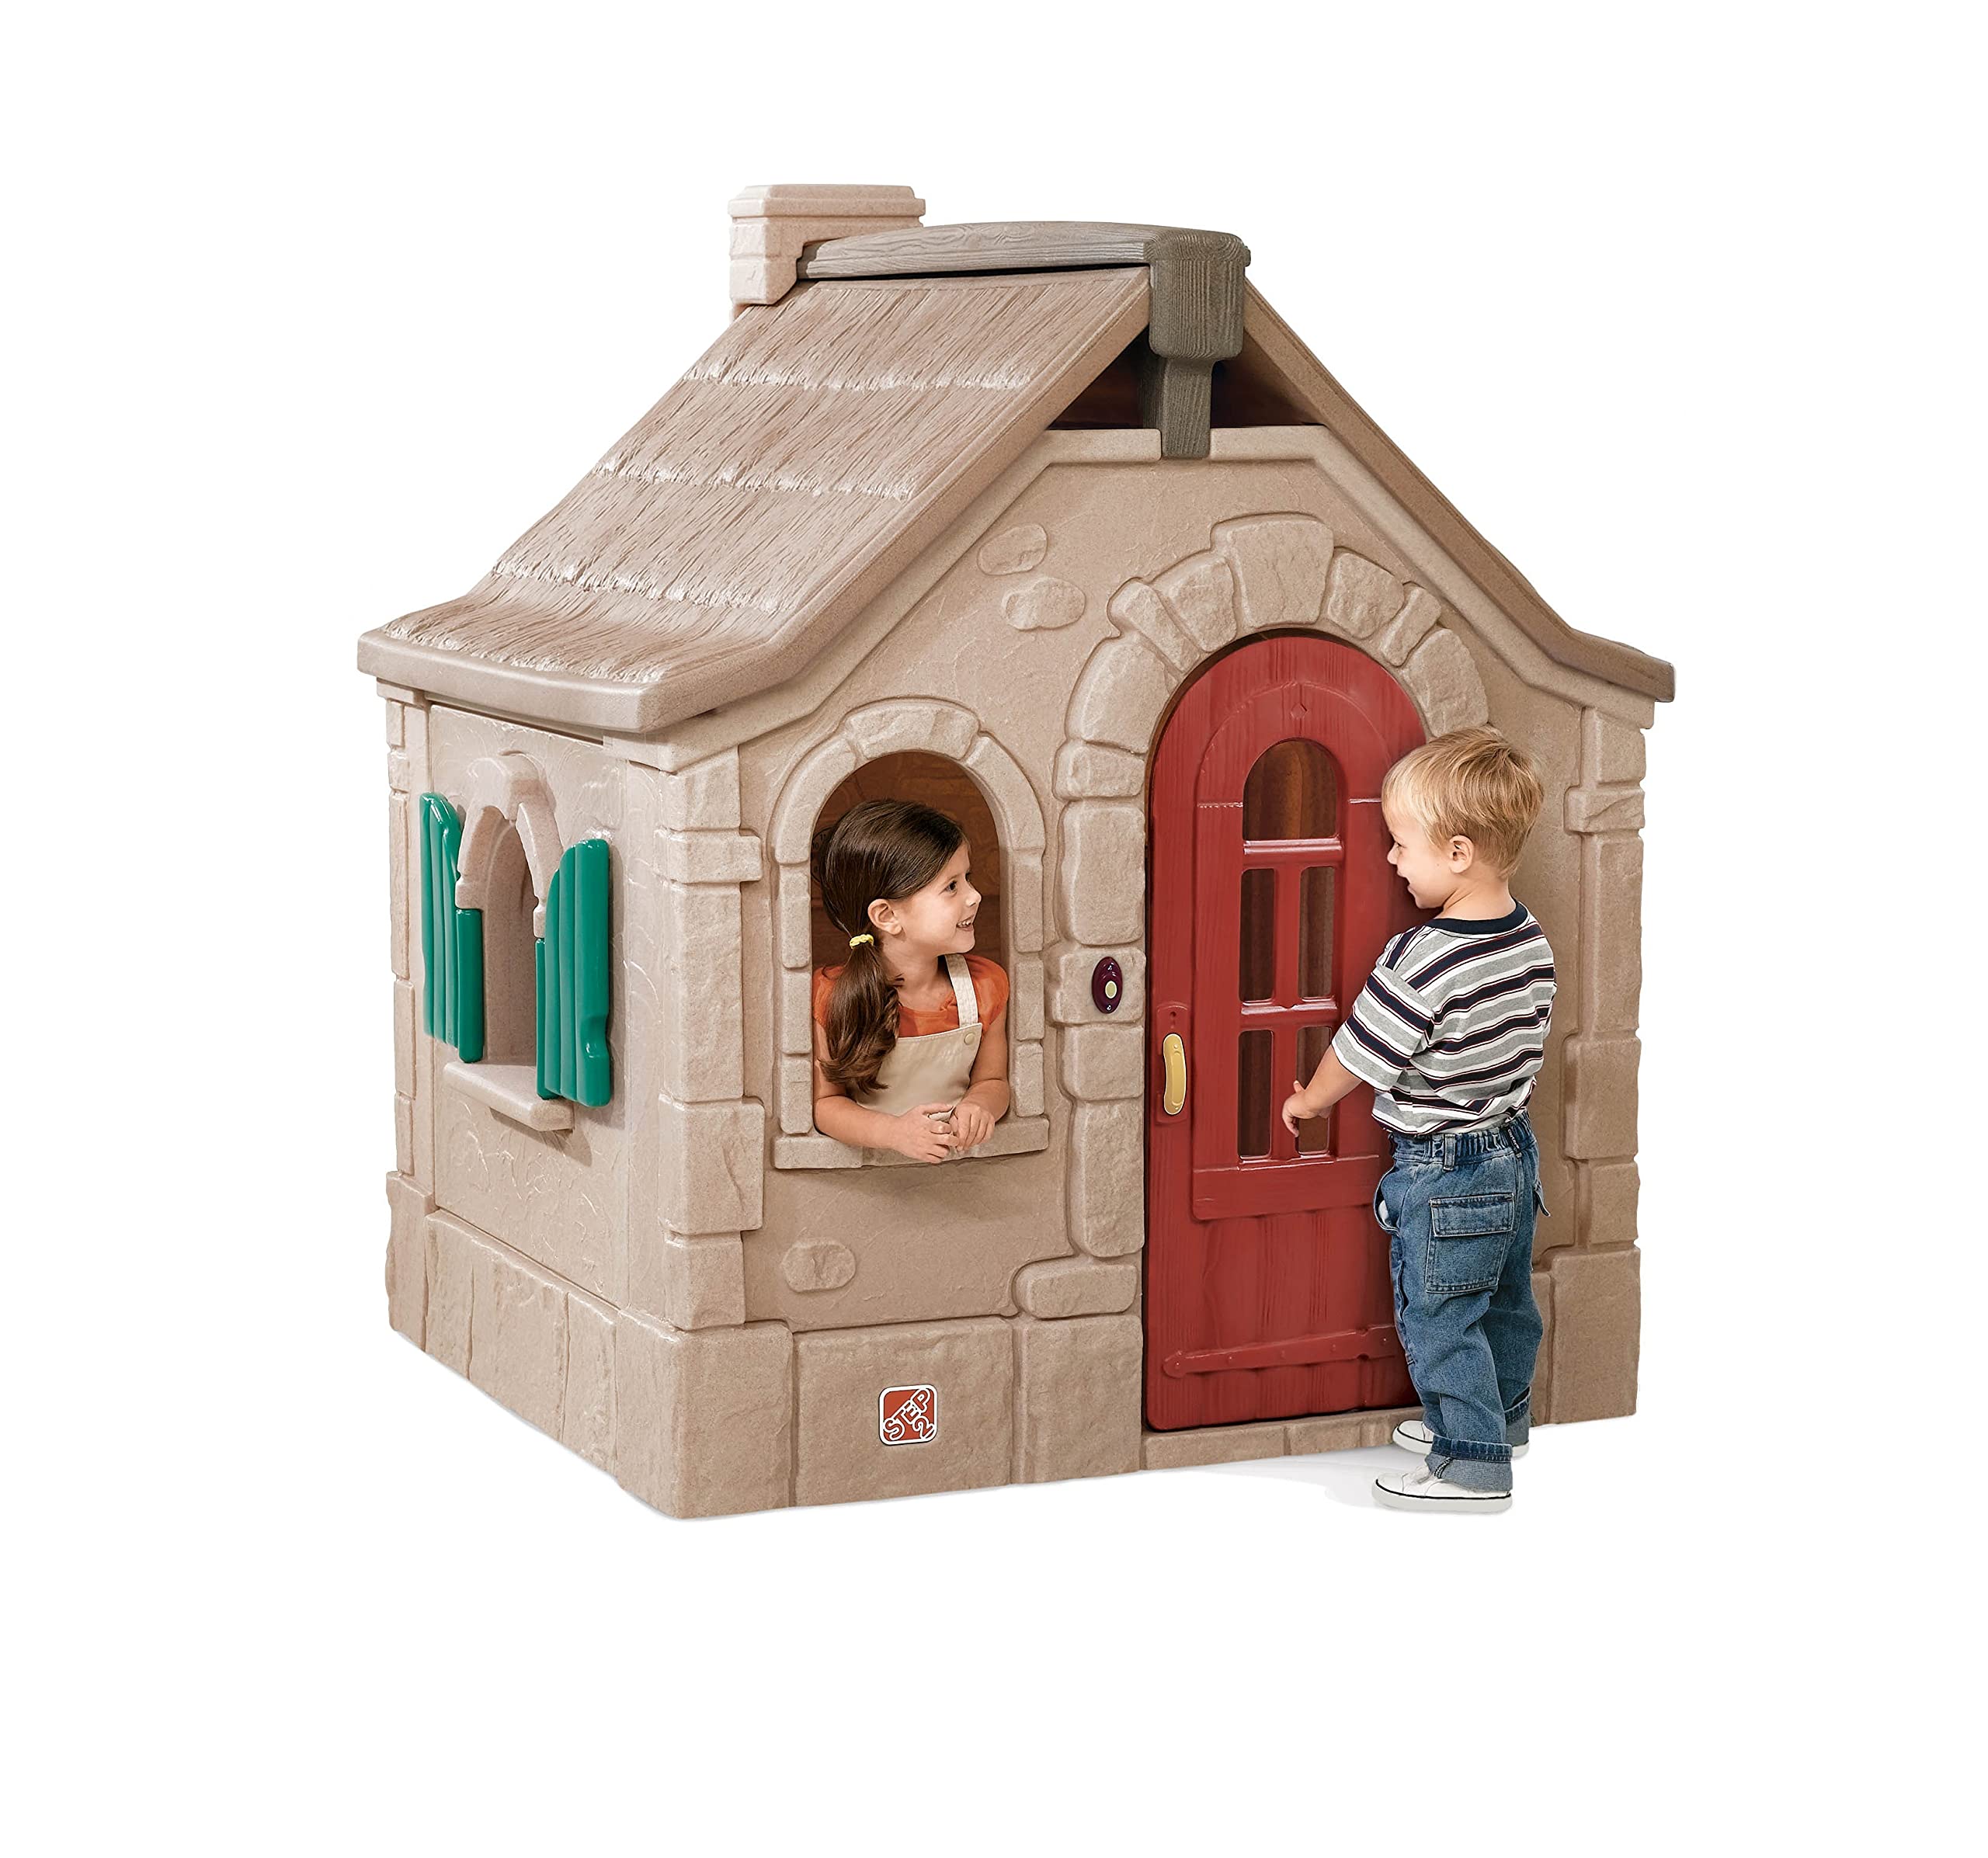 Step2 Naturally Playful StoryBook Cottage for Kids, Outdoor Playhouse with Realistic Details and Interactive Features for Toddlers, Ages 1.5+ Years Old, Easy Assembly